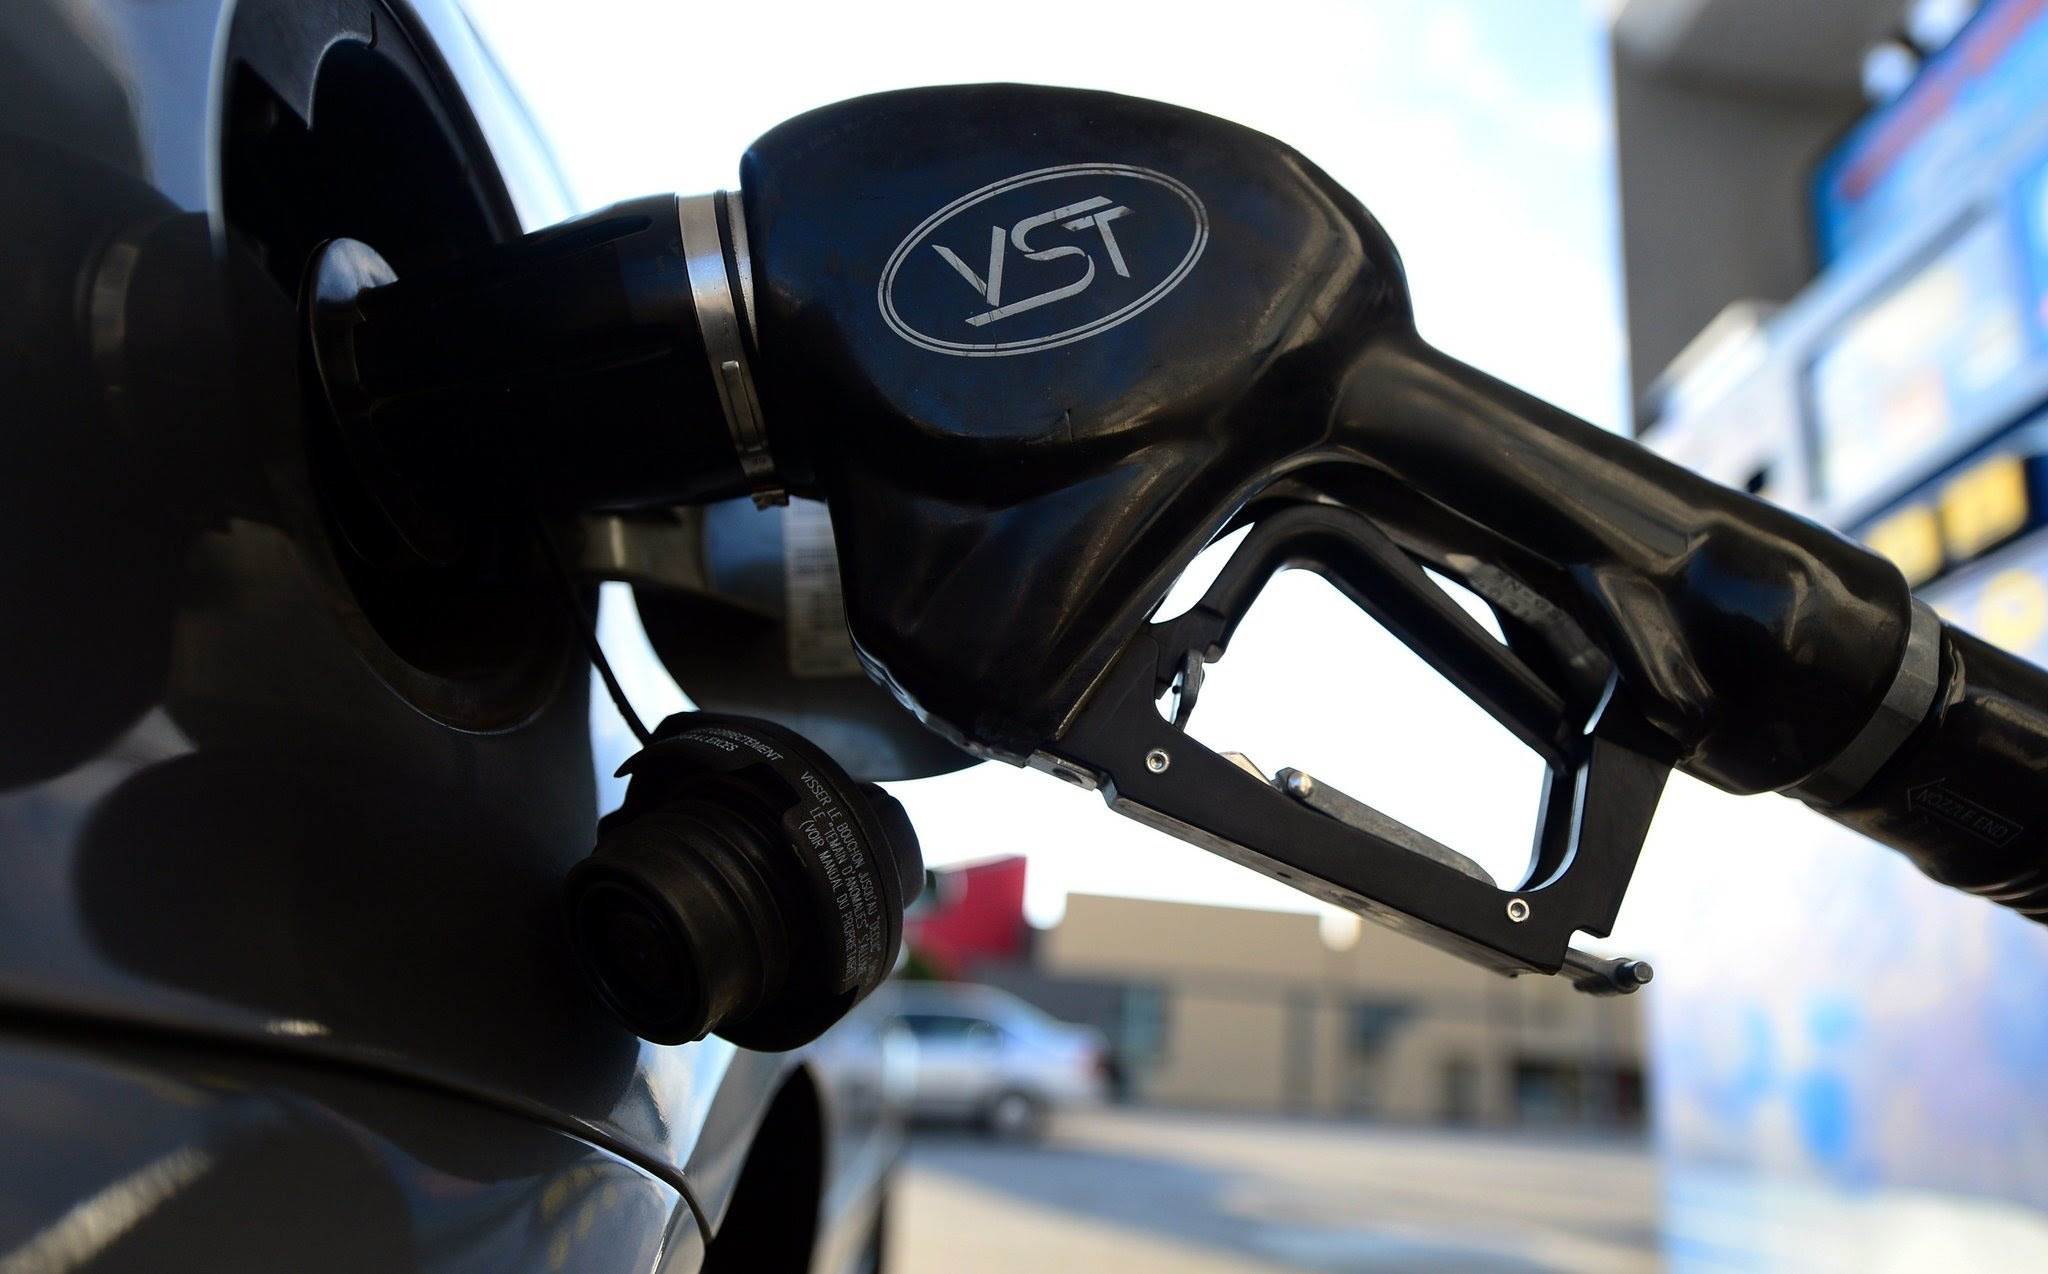 A higher gasoline tax would throttle back economic growth